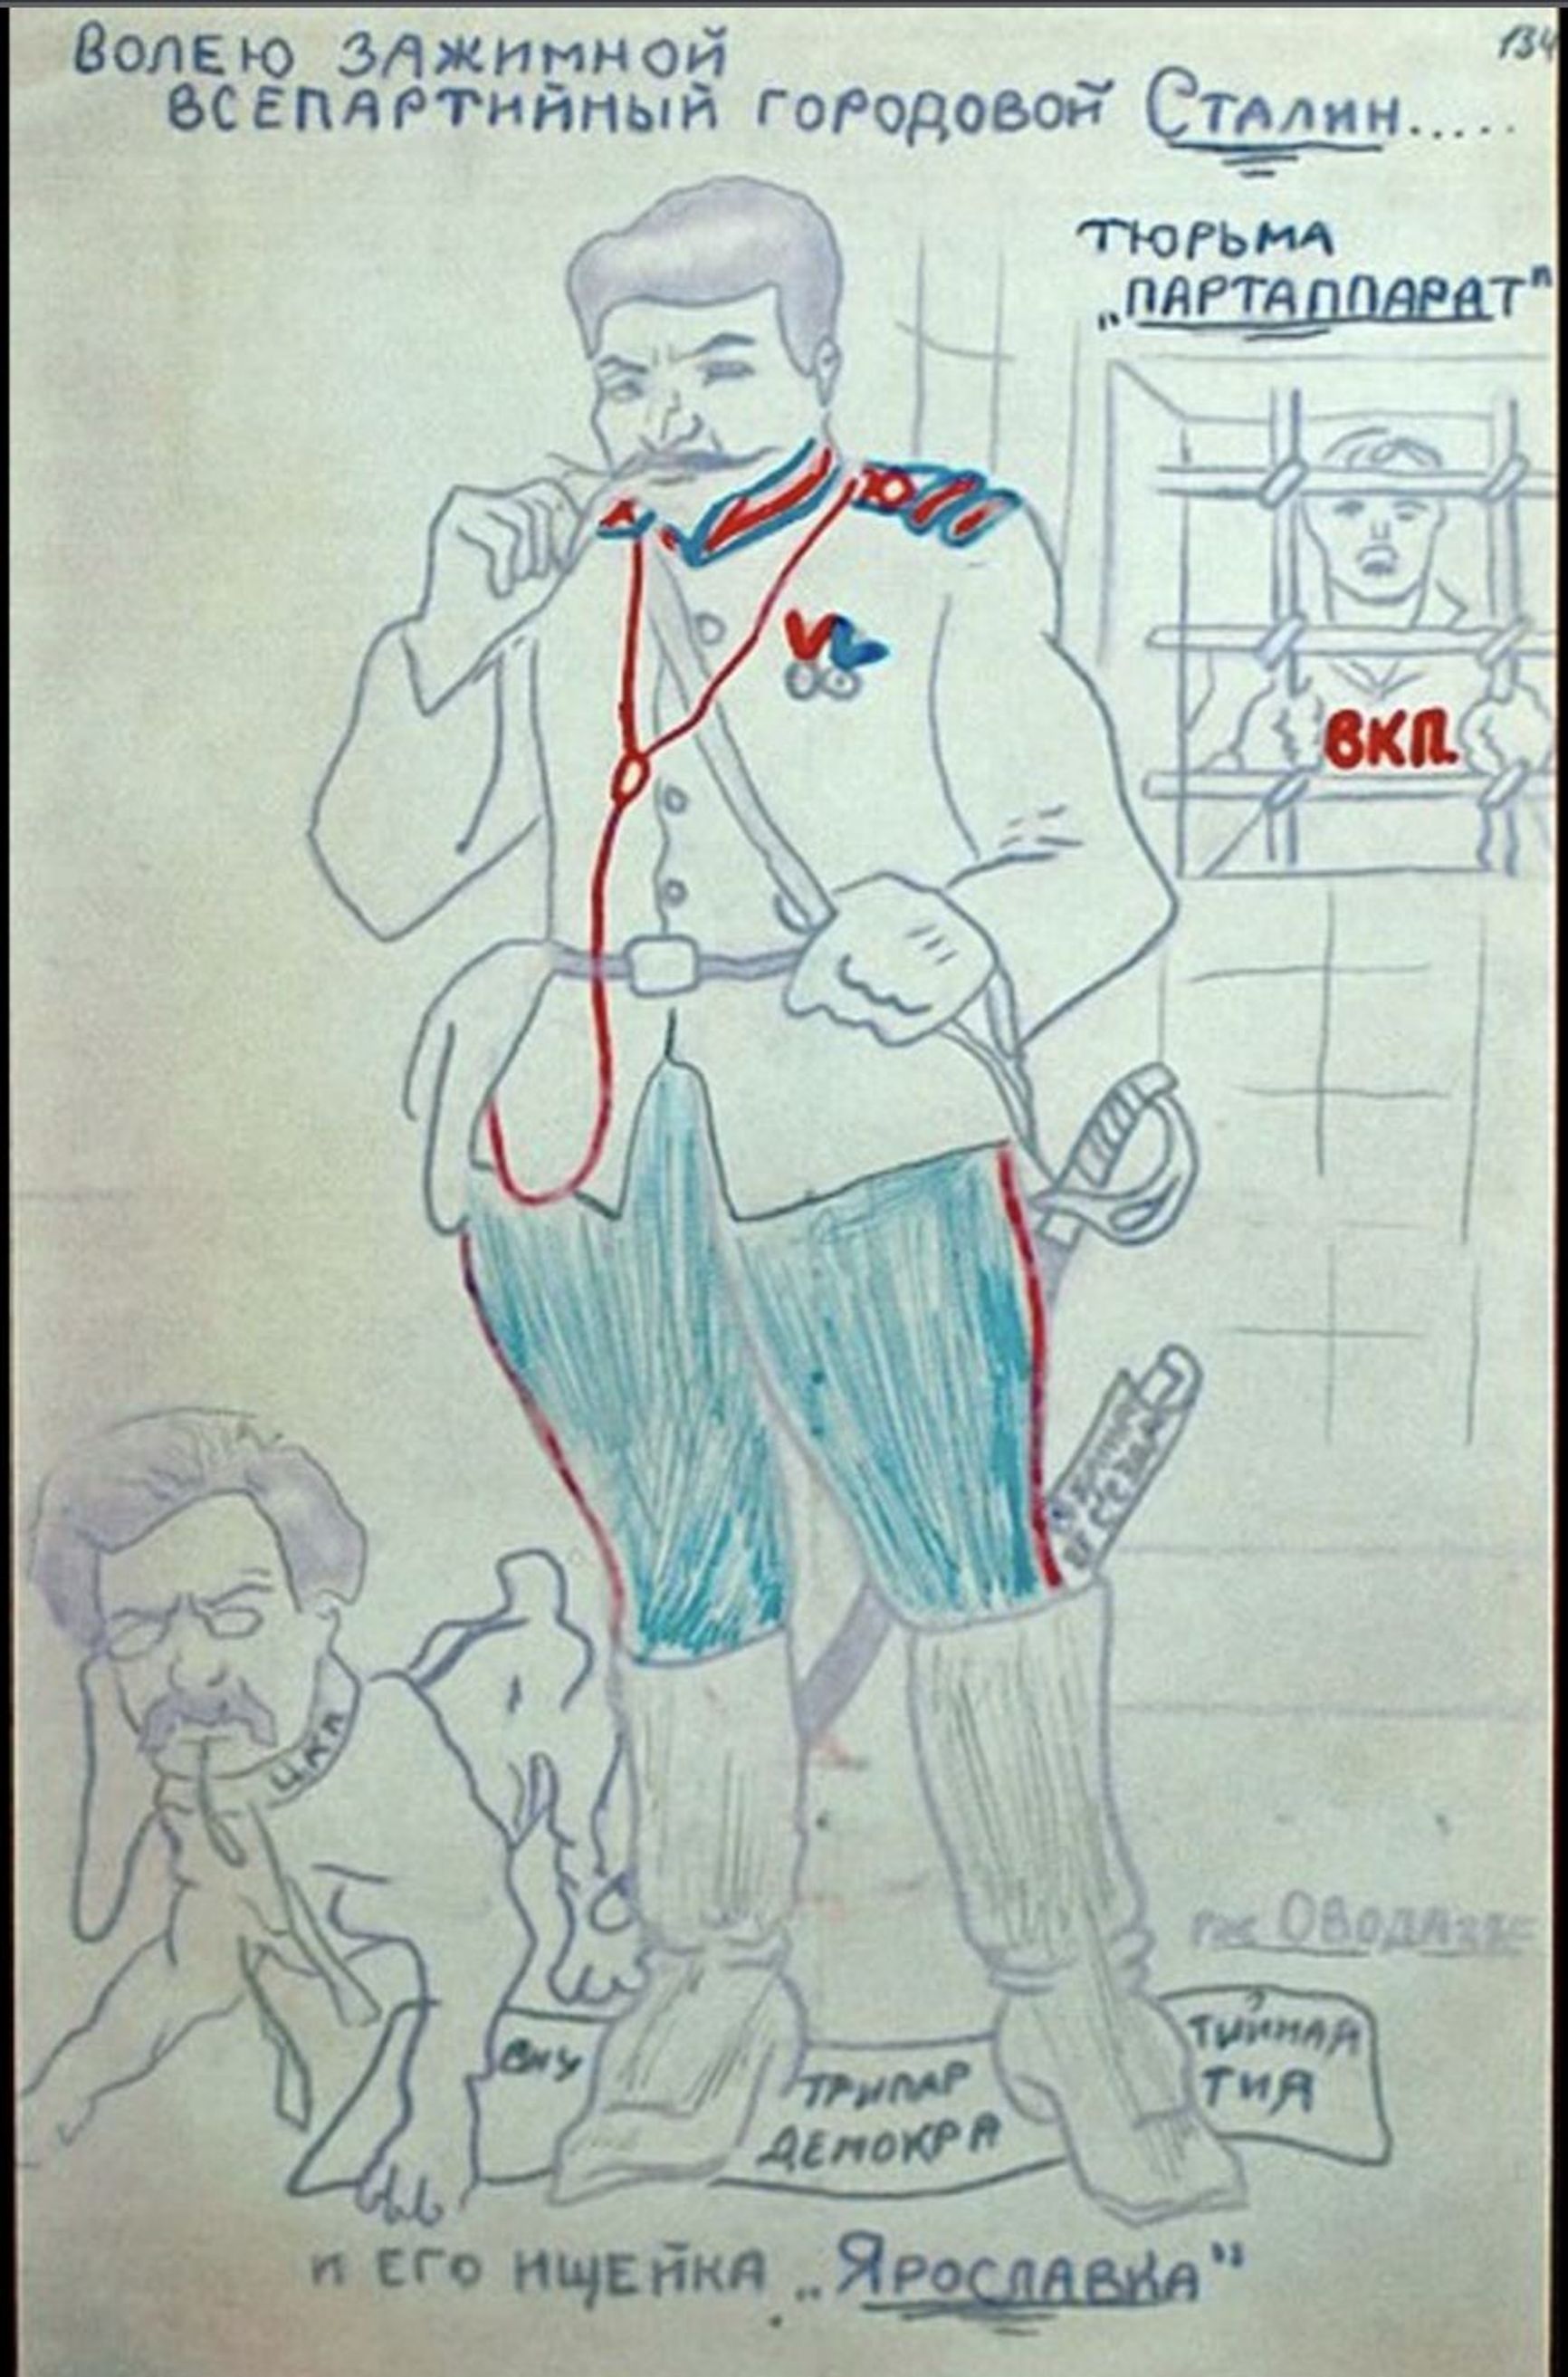 Cartoon depicting Stalin and Yaroslavsky disseminated after the 15th Congress of the VKP(b) by the «left opposition»